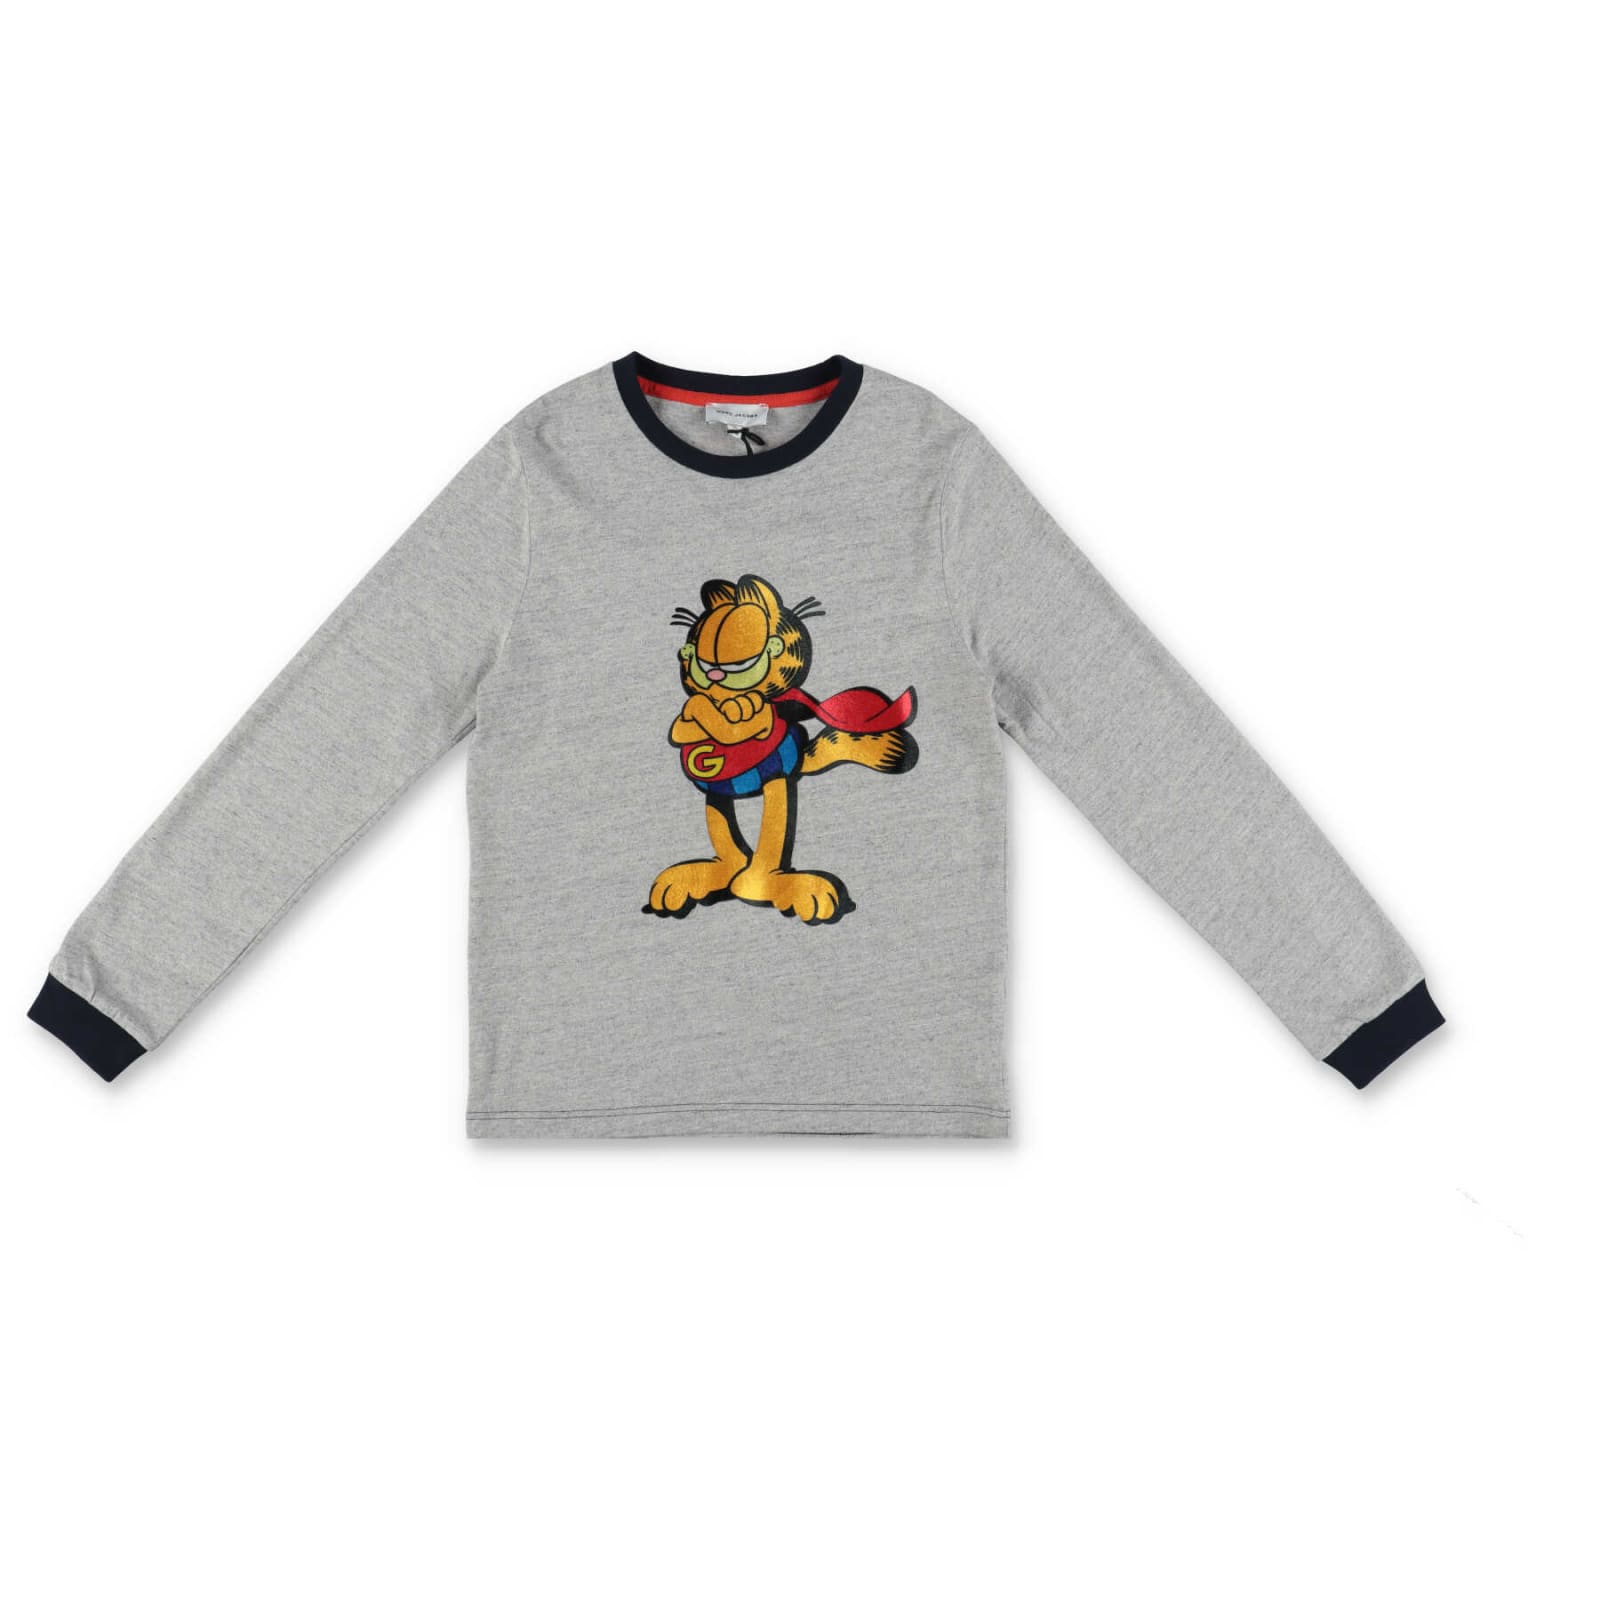 LITTLE MARC JACOBS MARC JACOBS T-SHIRT GARFIELD GRIGIA IN JERSEY DI COTONE BAMBINO